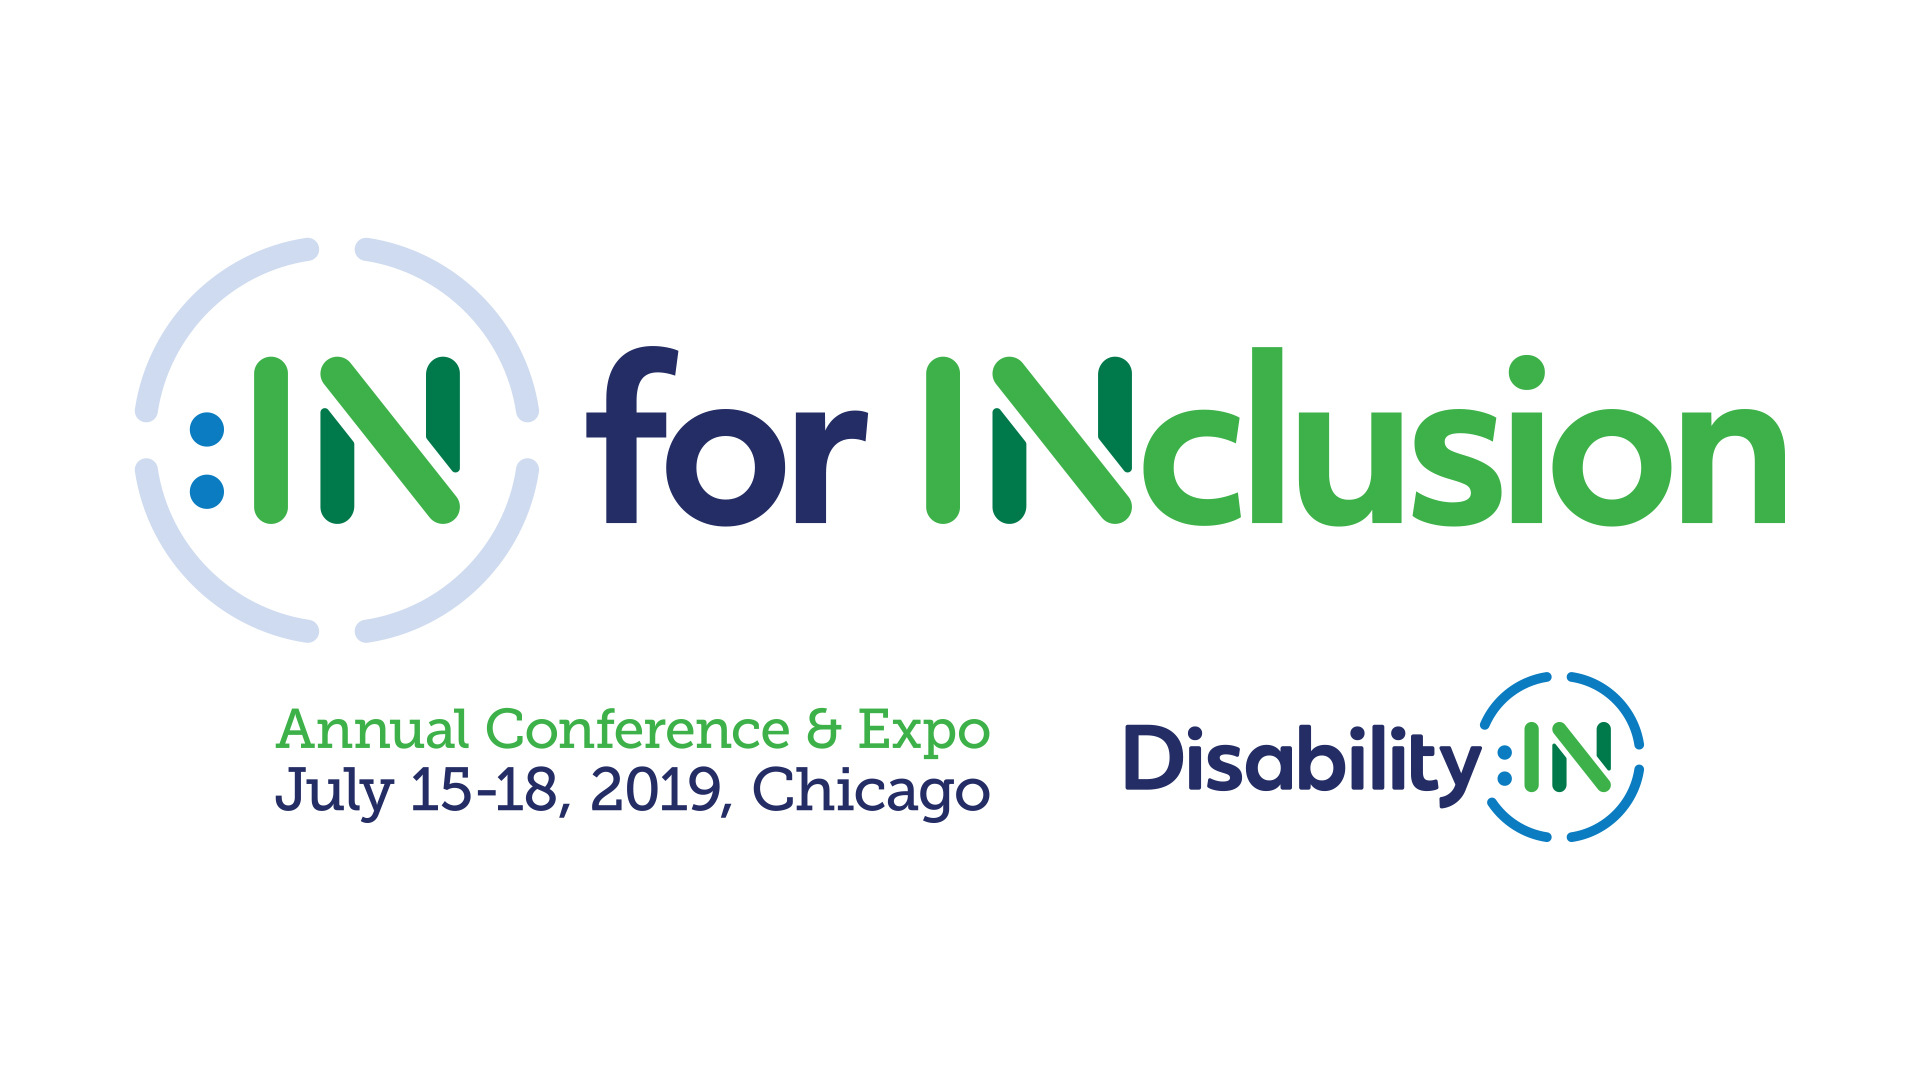 IN for Inclusion. Annual Conference and Expo. July 15 - 18, 2019. Chicago. Disability:IN.